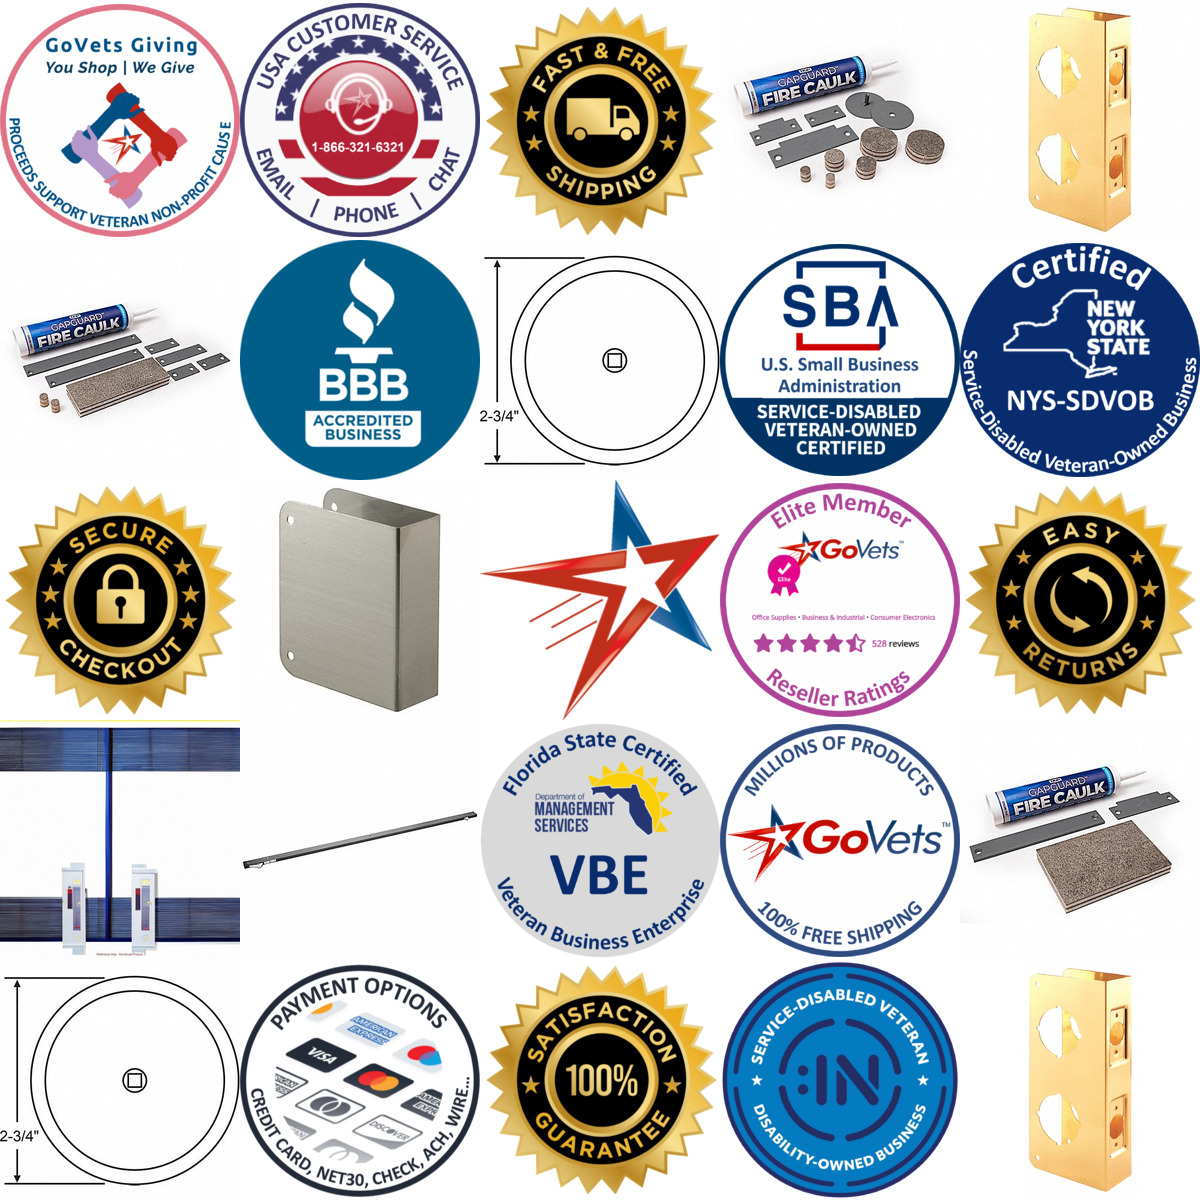 A selection of Door Protectors products on GoVets